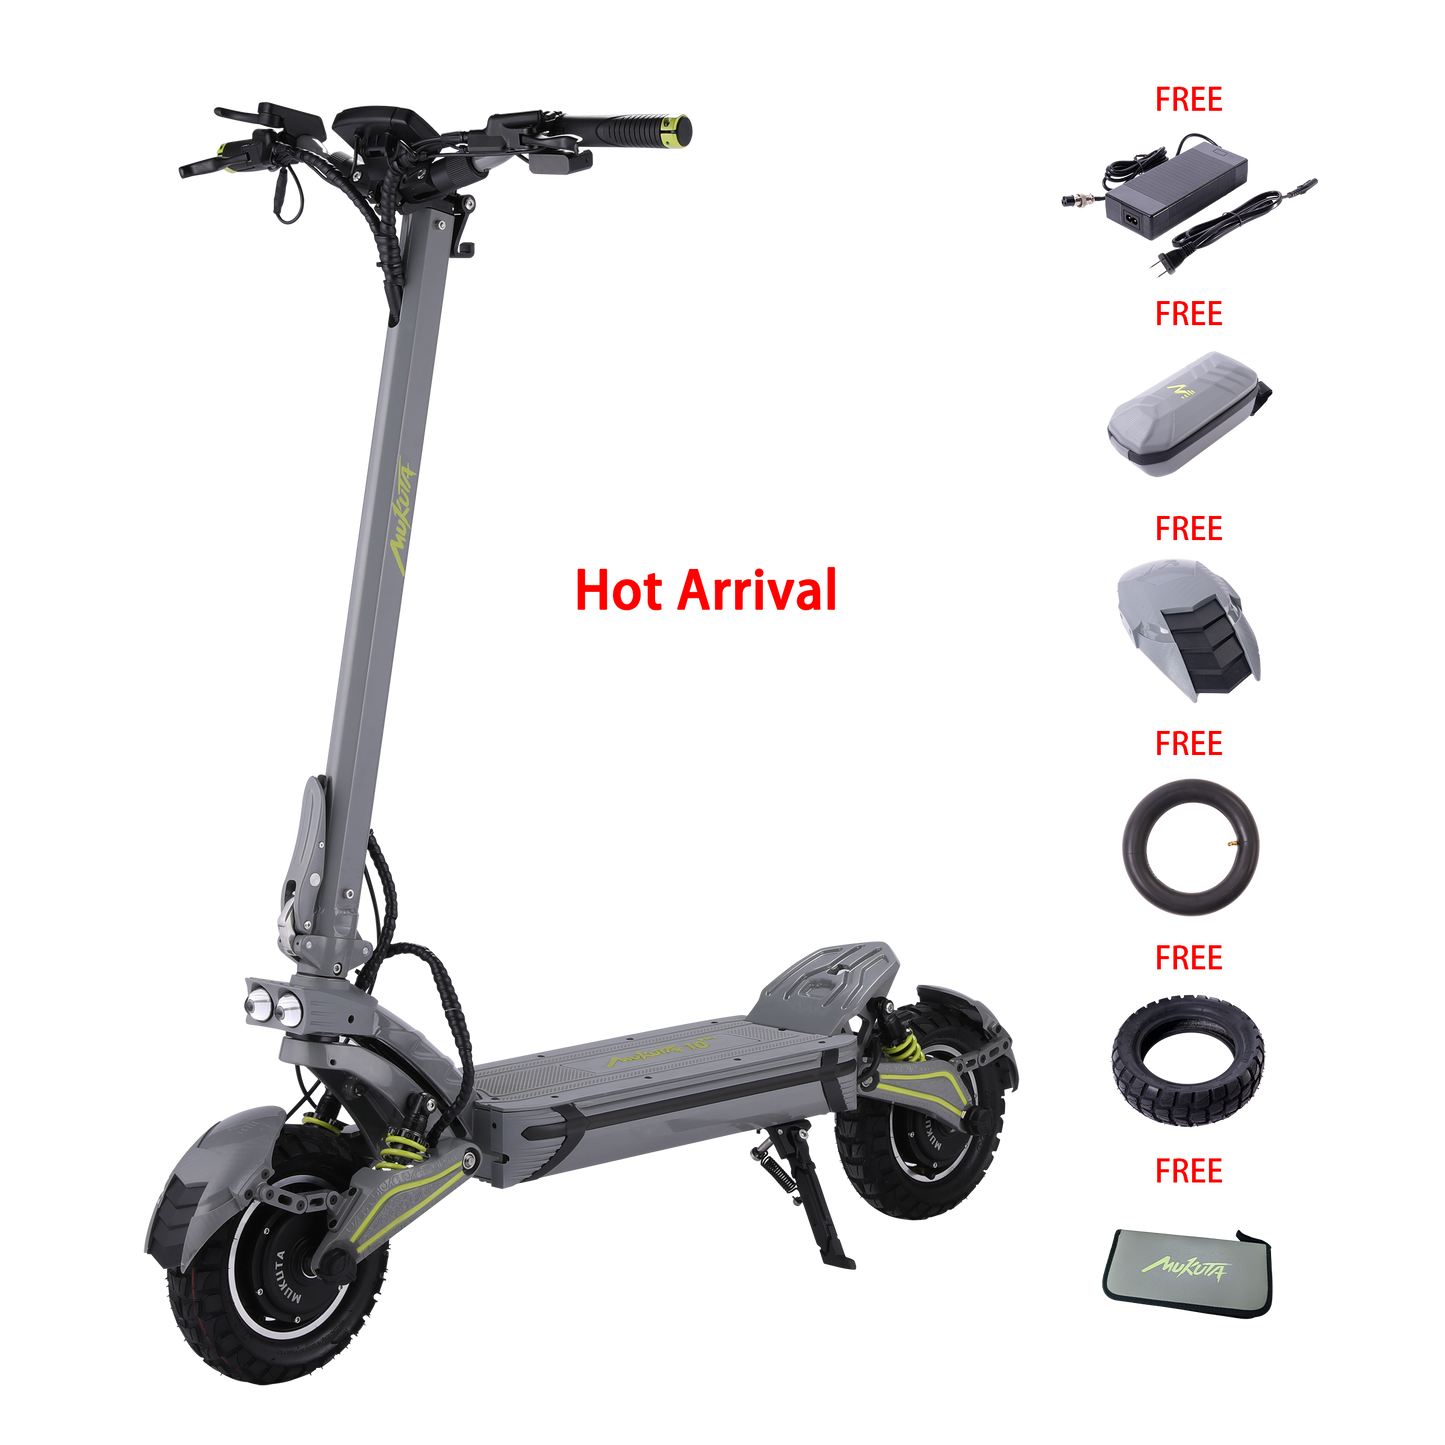 MUKUTA 10 Plus Electric Scooter, 2800W Dual Motor, 62/74 Miles Range, 10 Inches Off-Road Tire Scooter